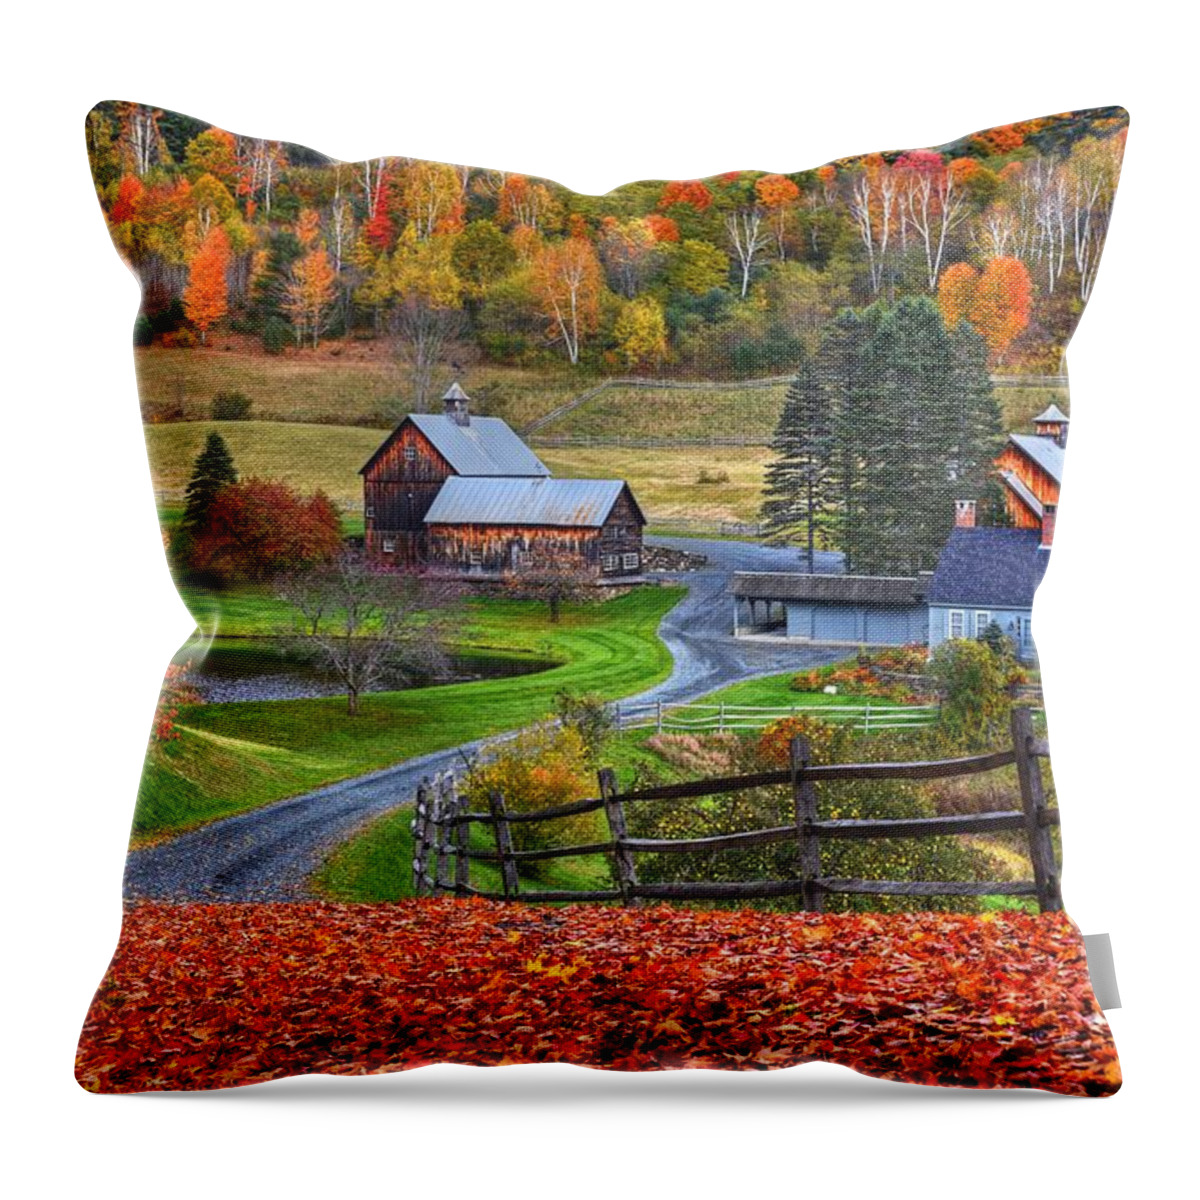 Woodstock Throw Pillow featuring the photograph Sleepy Hollows Farm Woodstock Vermont VT Autumn Bright Colors by Toby McGuire